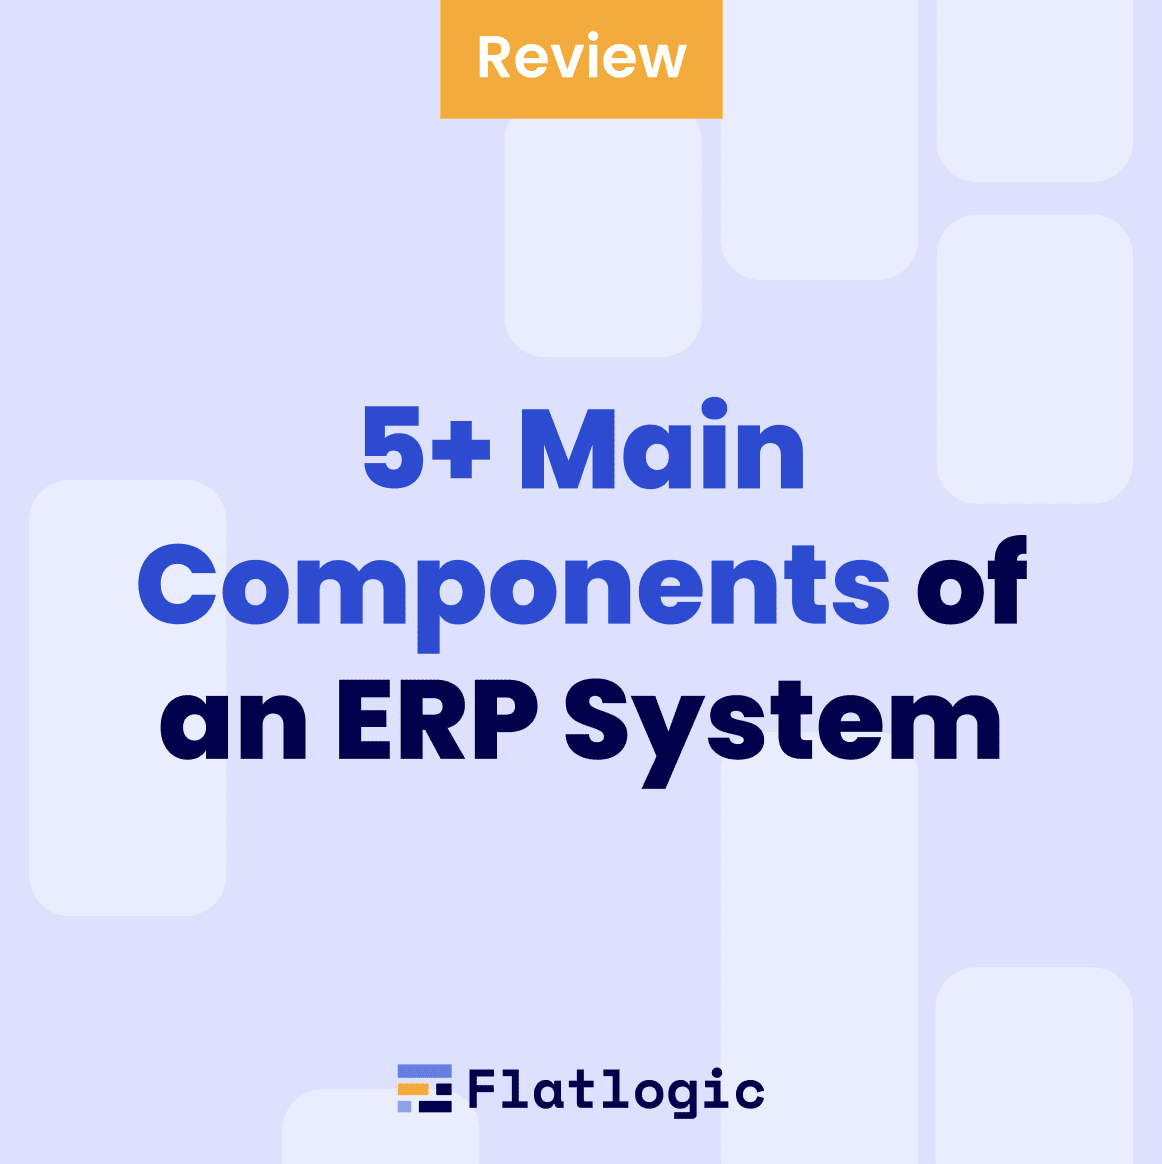 5+ Main Components of an ERP System